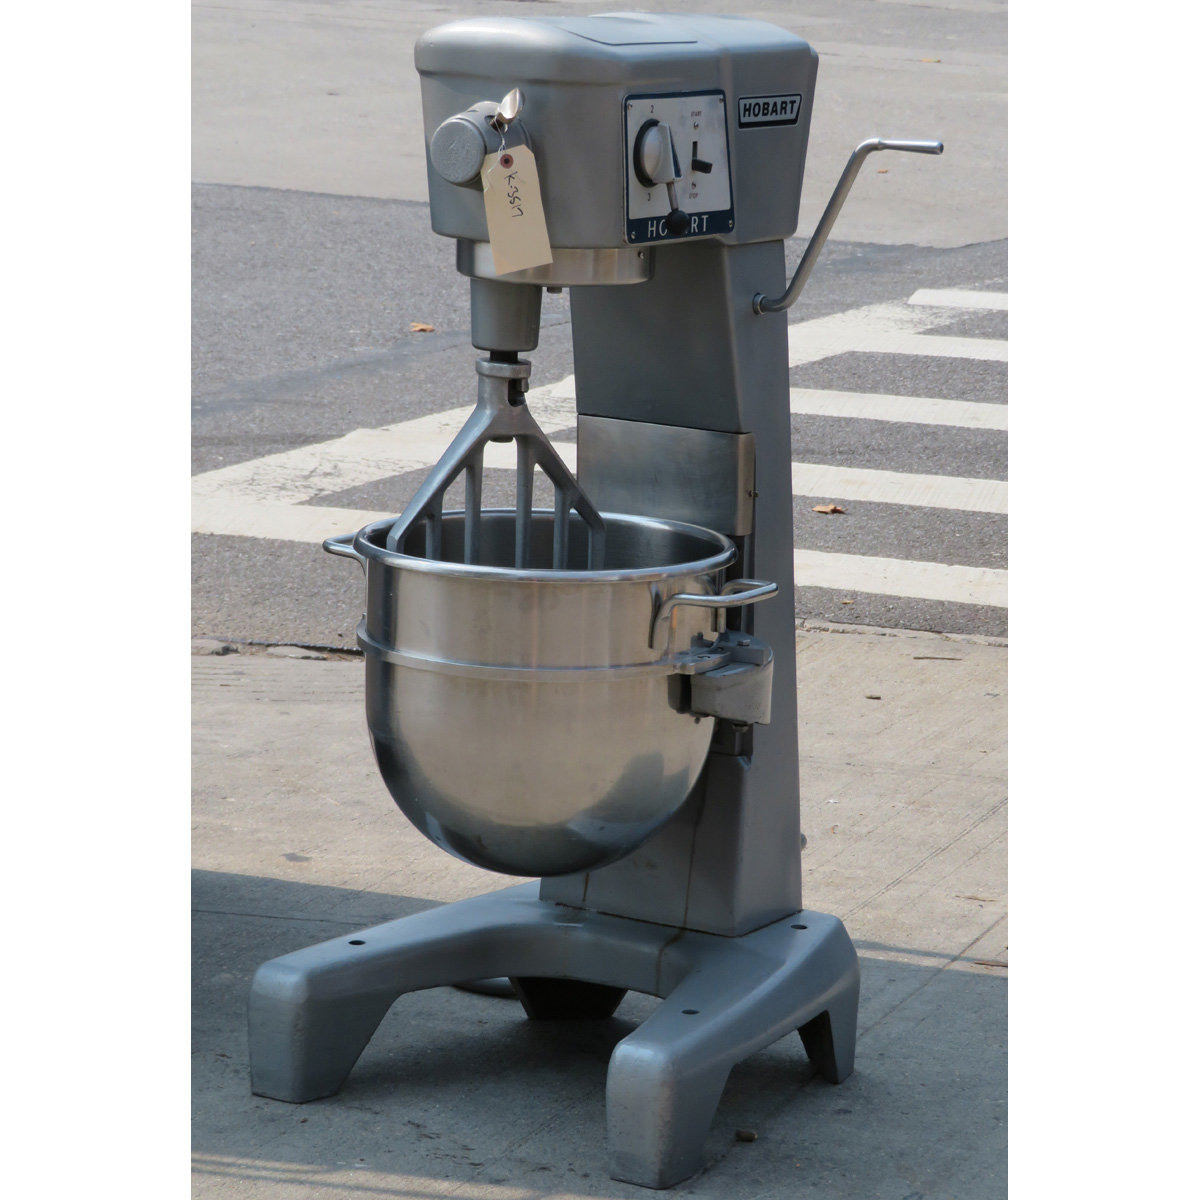 Hobart 30 Quart Mixer D300, Used Great Condition